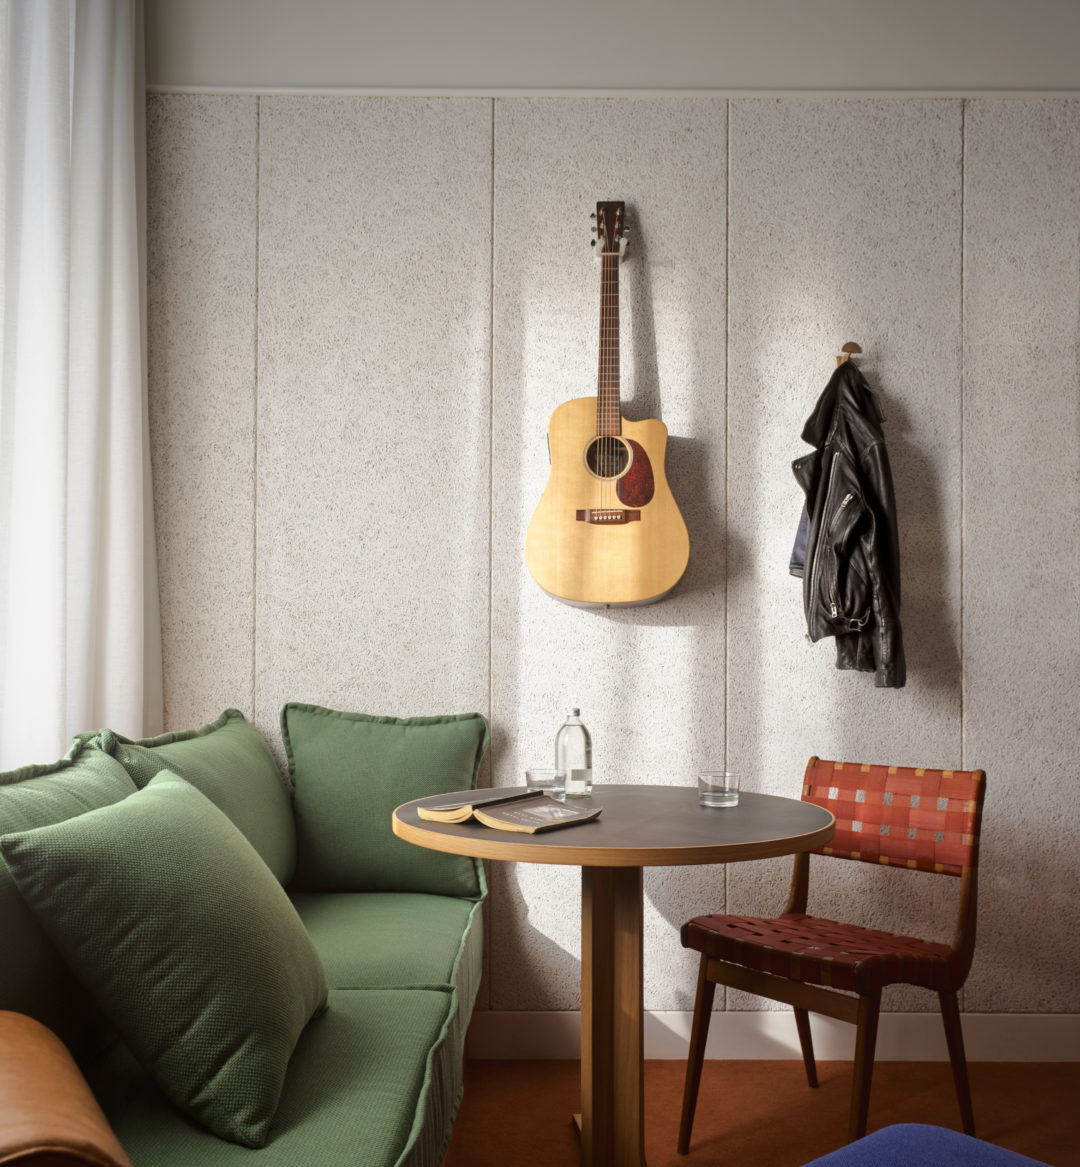 Green sofa and throw pillows on one side, red chair on the other surrounding small round table, with guitar hanging on wall in background